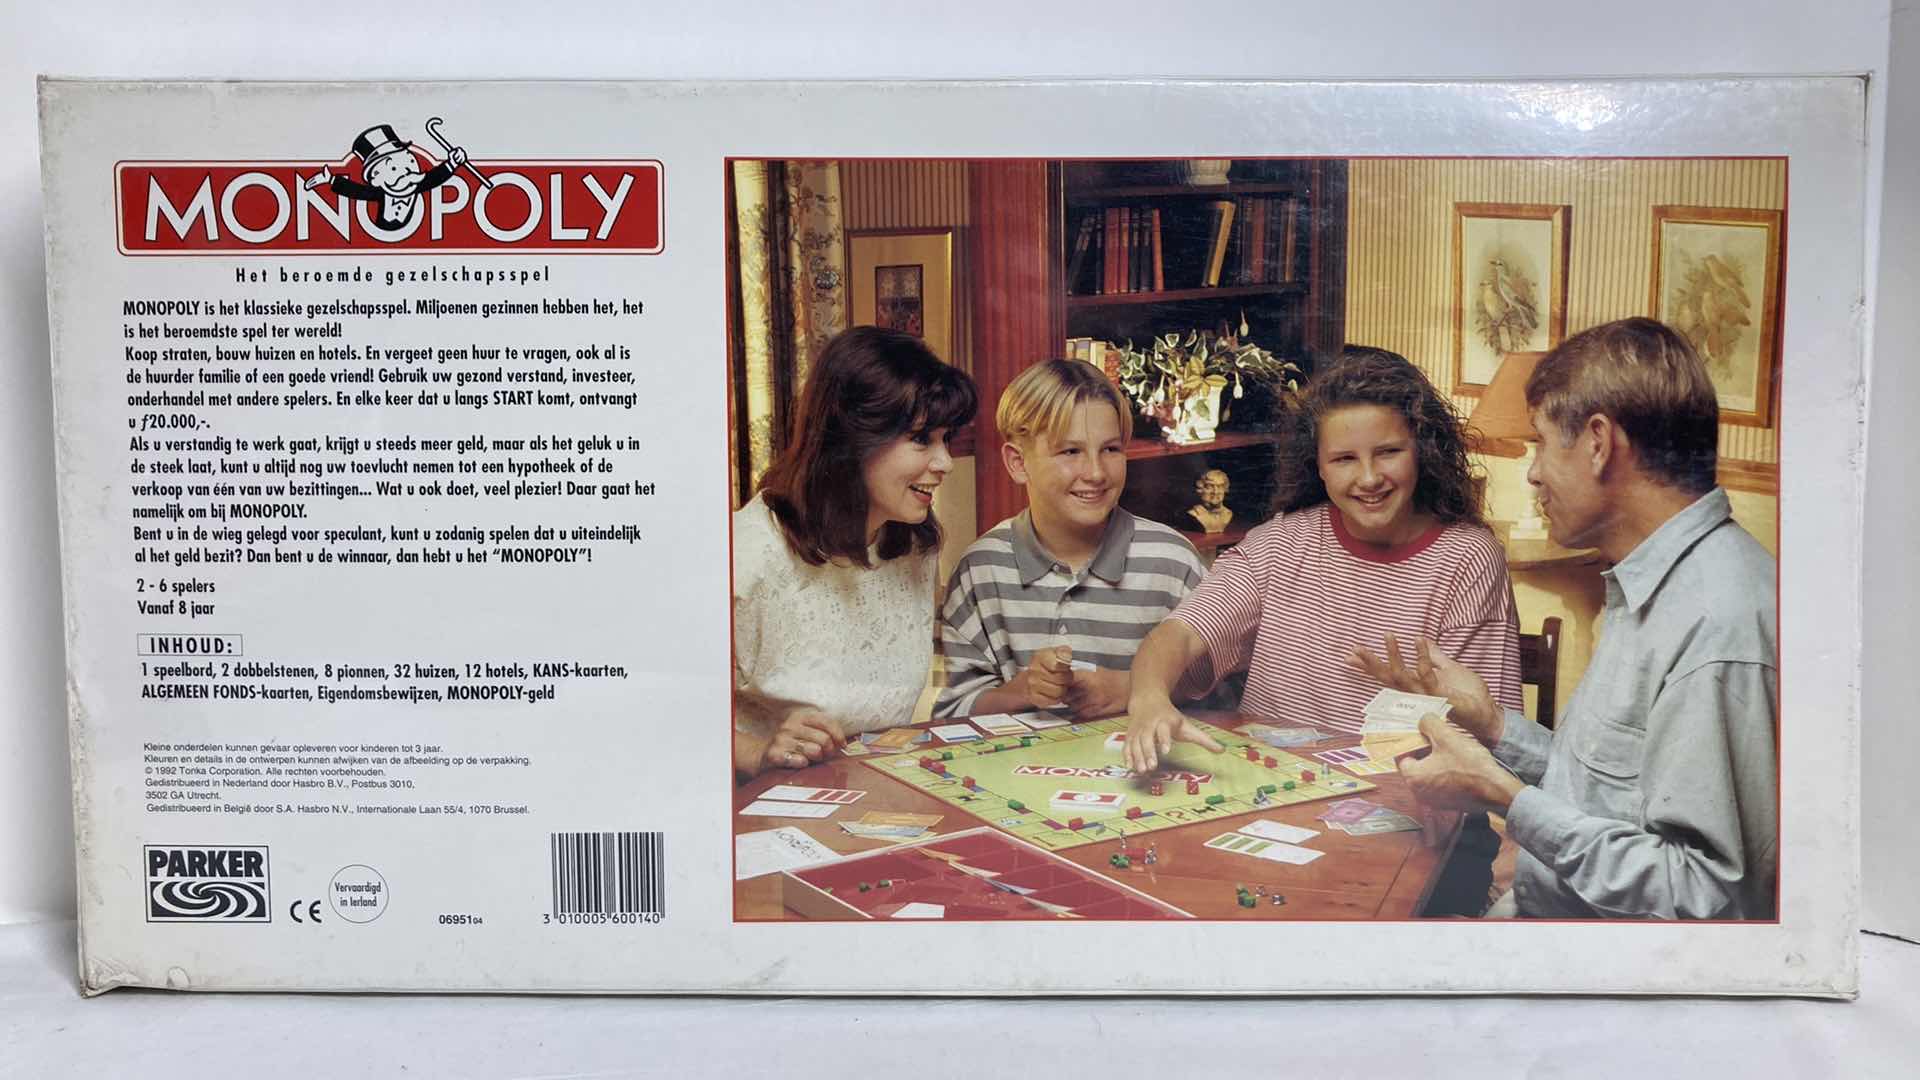 Photo 4 of PARKER DUTCH MONOPOLY BOARD GAME 1992